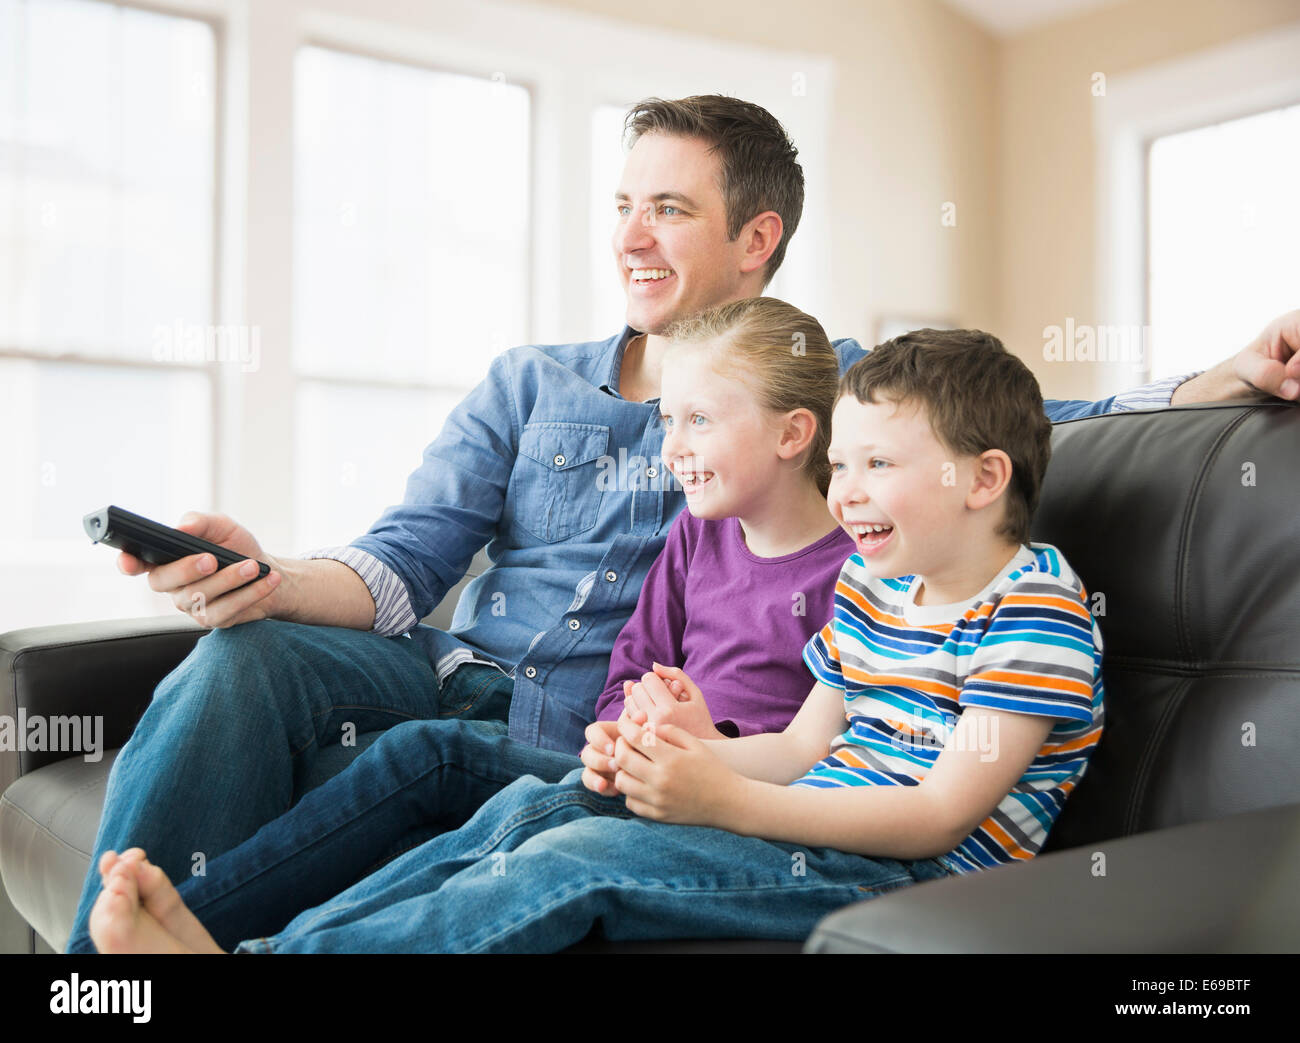 Caucasian father and children watching television on sofa Stock Photo